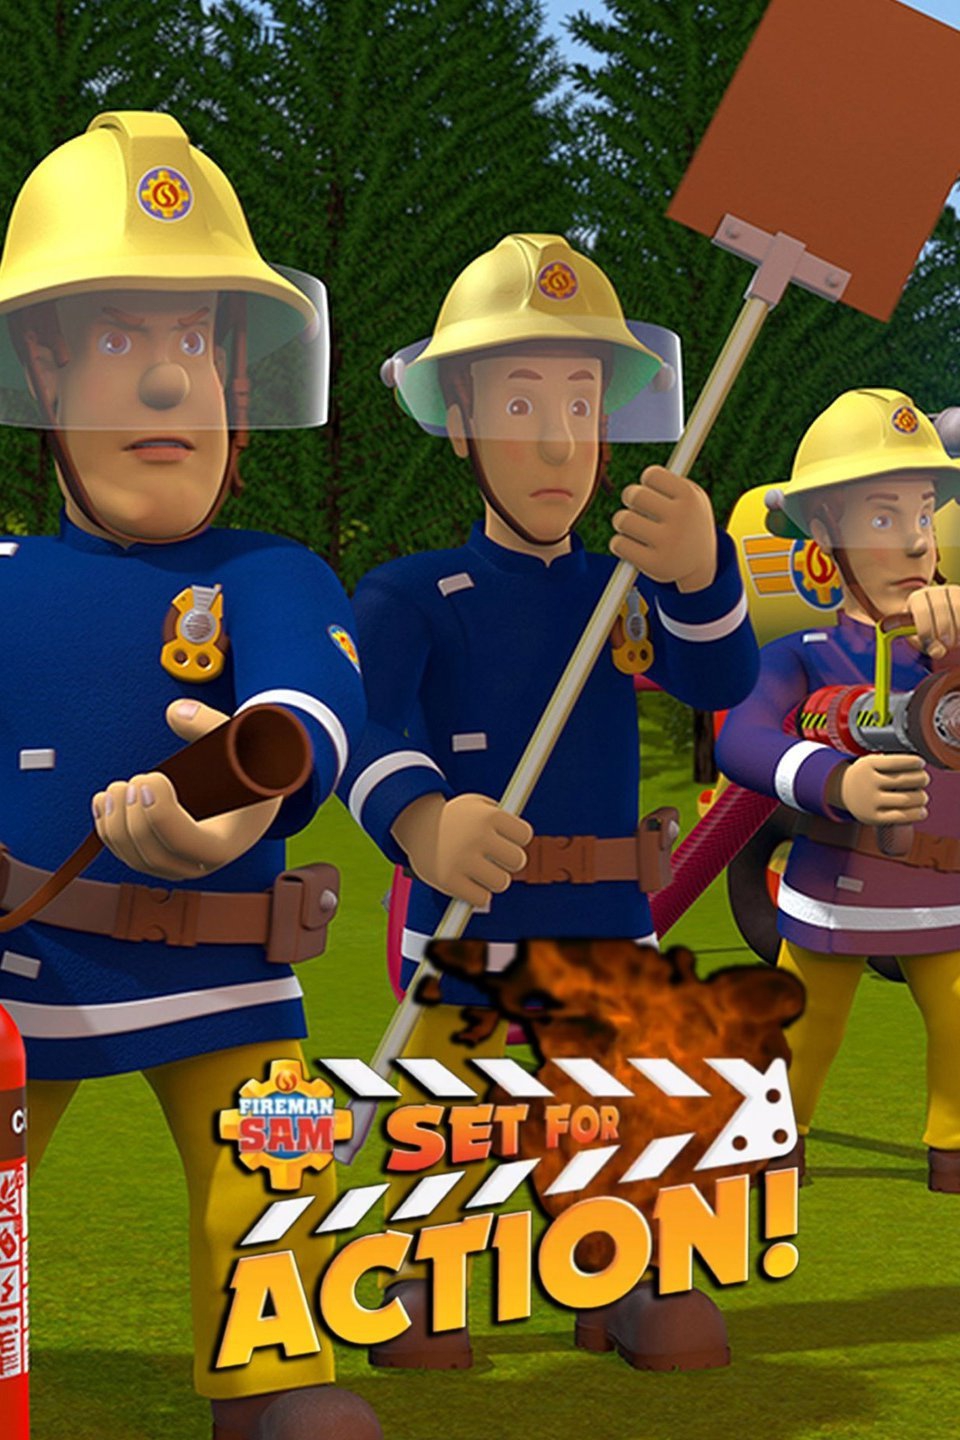 Watch Fireman Sam: Set For Action! (2018) Online for Free | The Roku